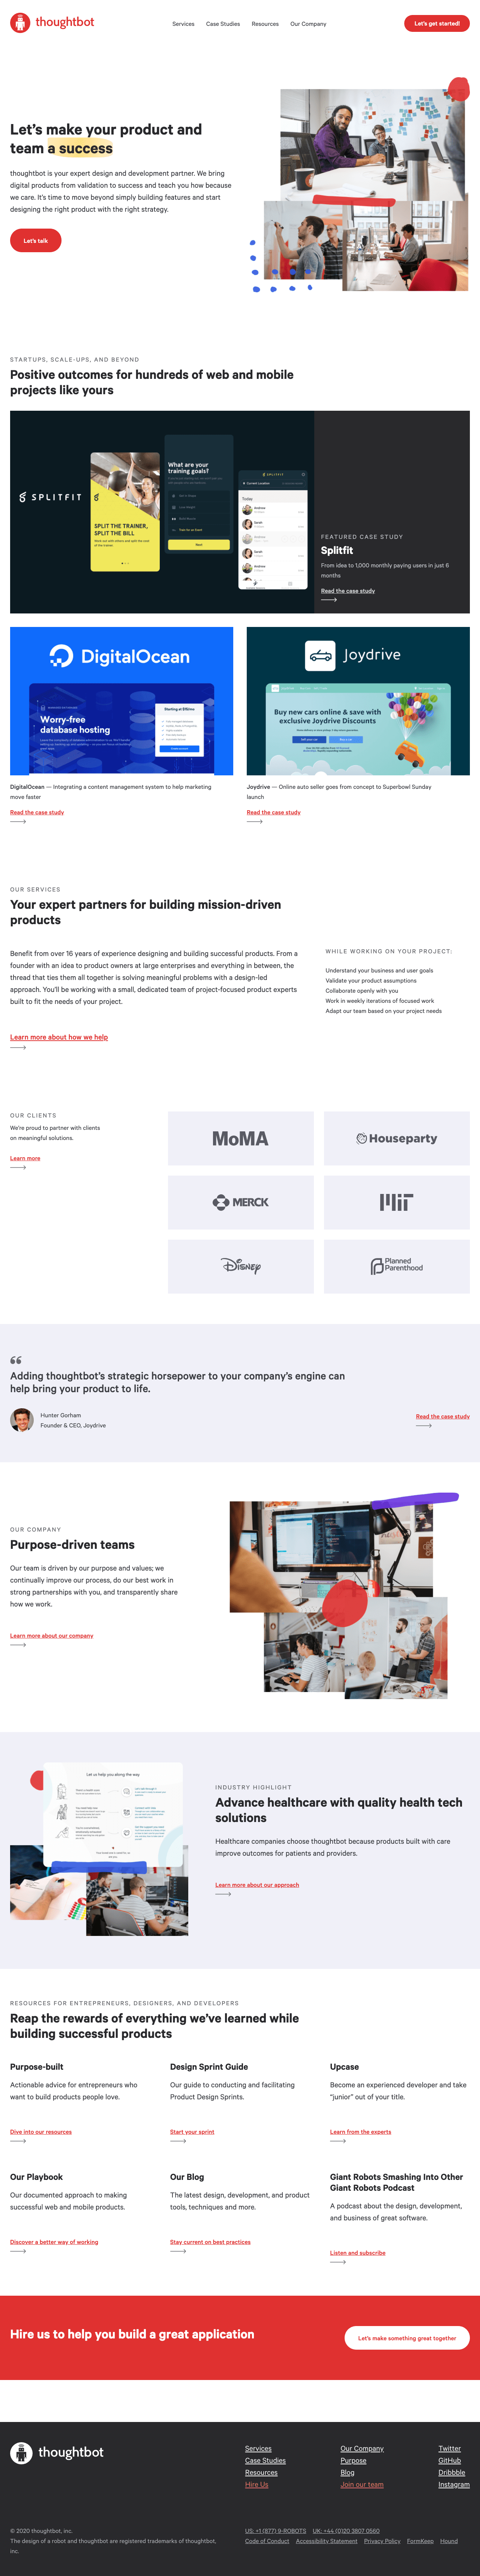 Screenshot of thoughtbot.com, March 2020